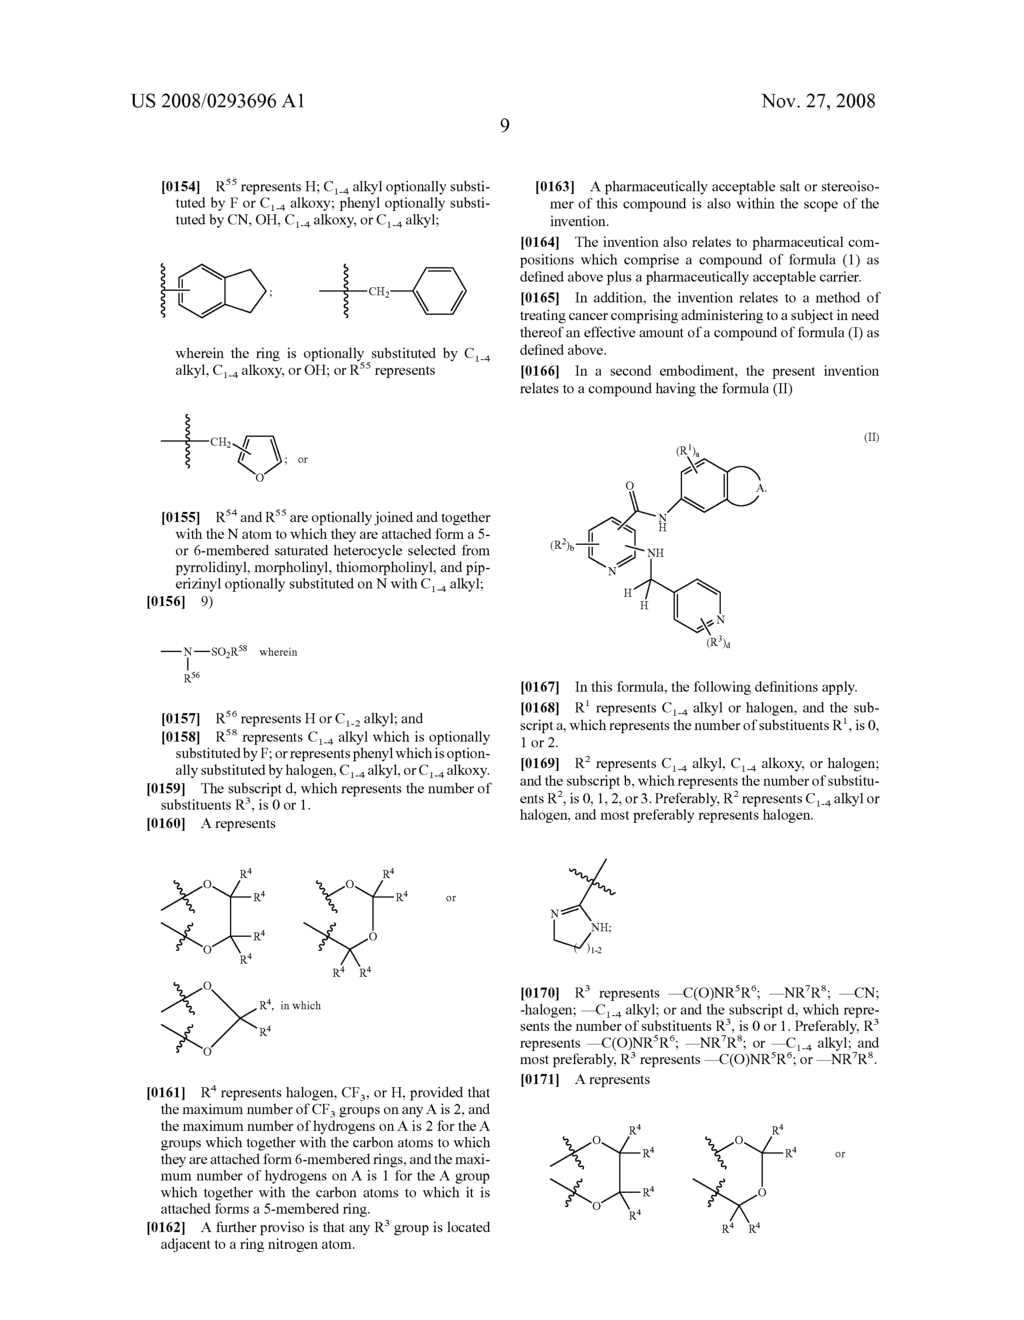 2-Aminoarylcarboxamides Useful as Cancer Chemotherapeutic Agents - diagram, schematic, and image 10